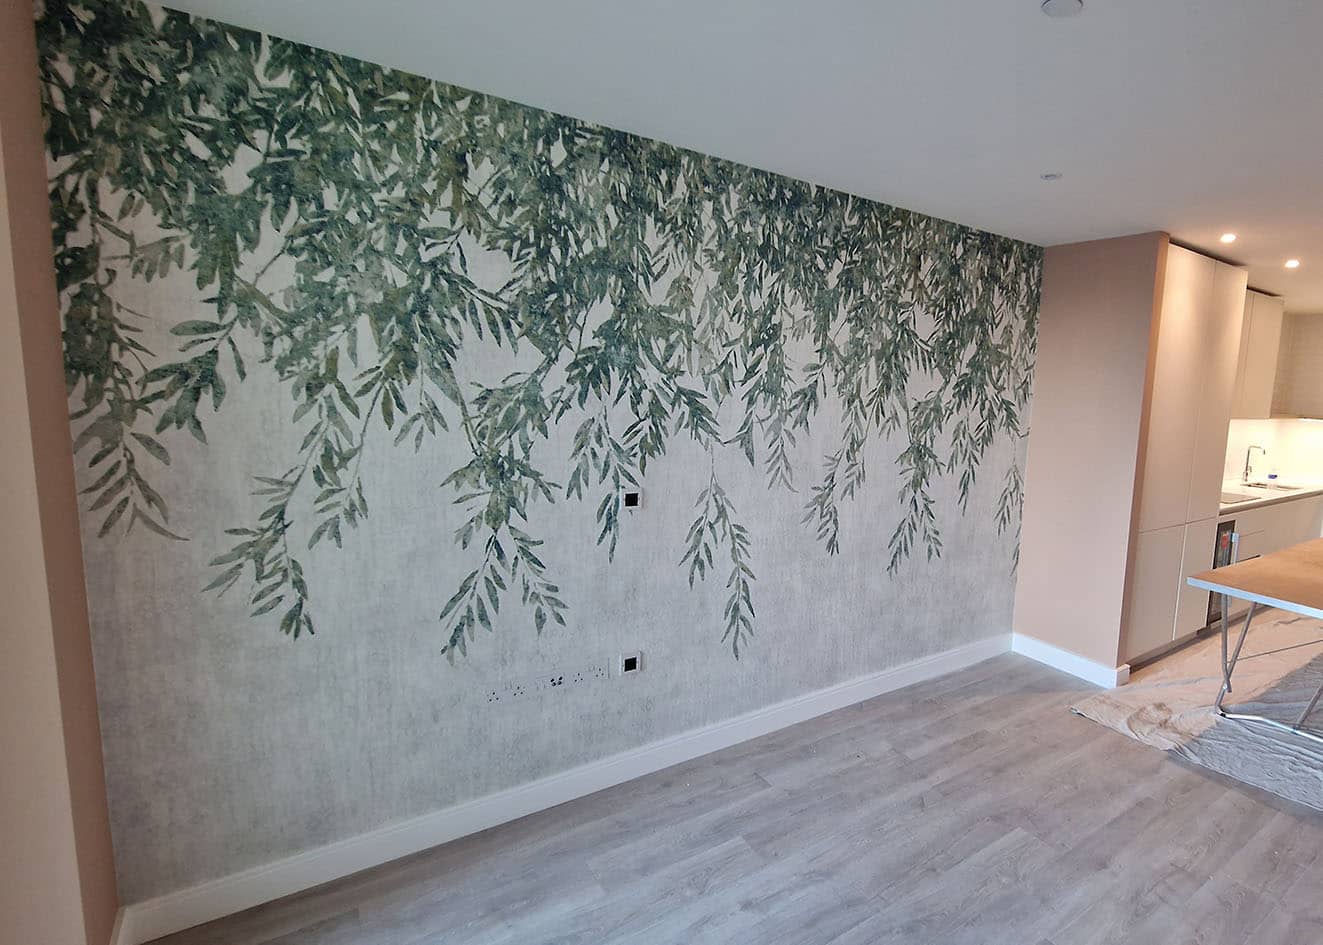 Feature wall botanical wallpaper installed by specialists wallpaper installers, London.